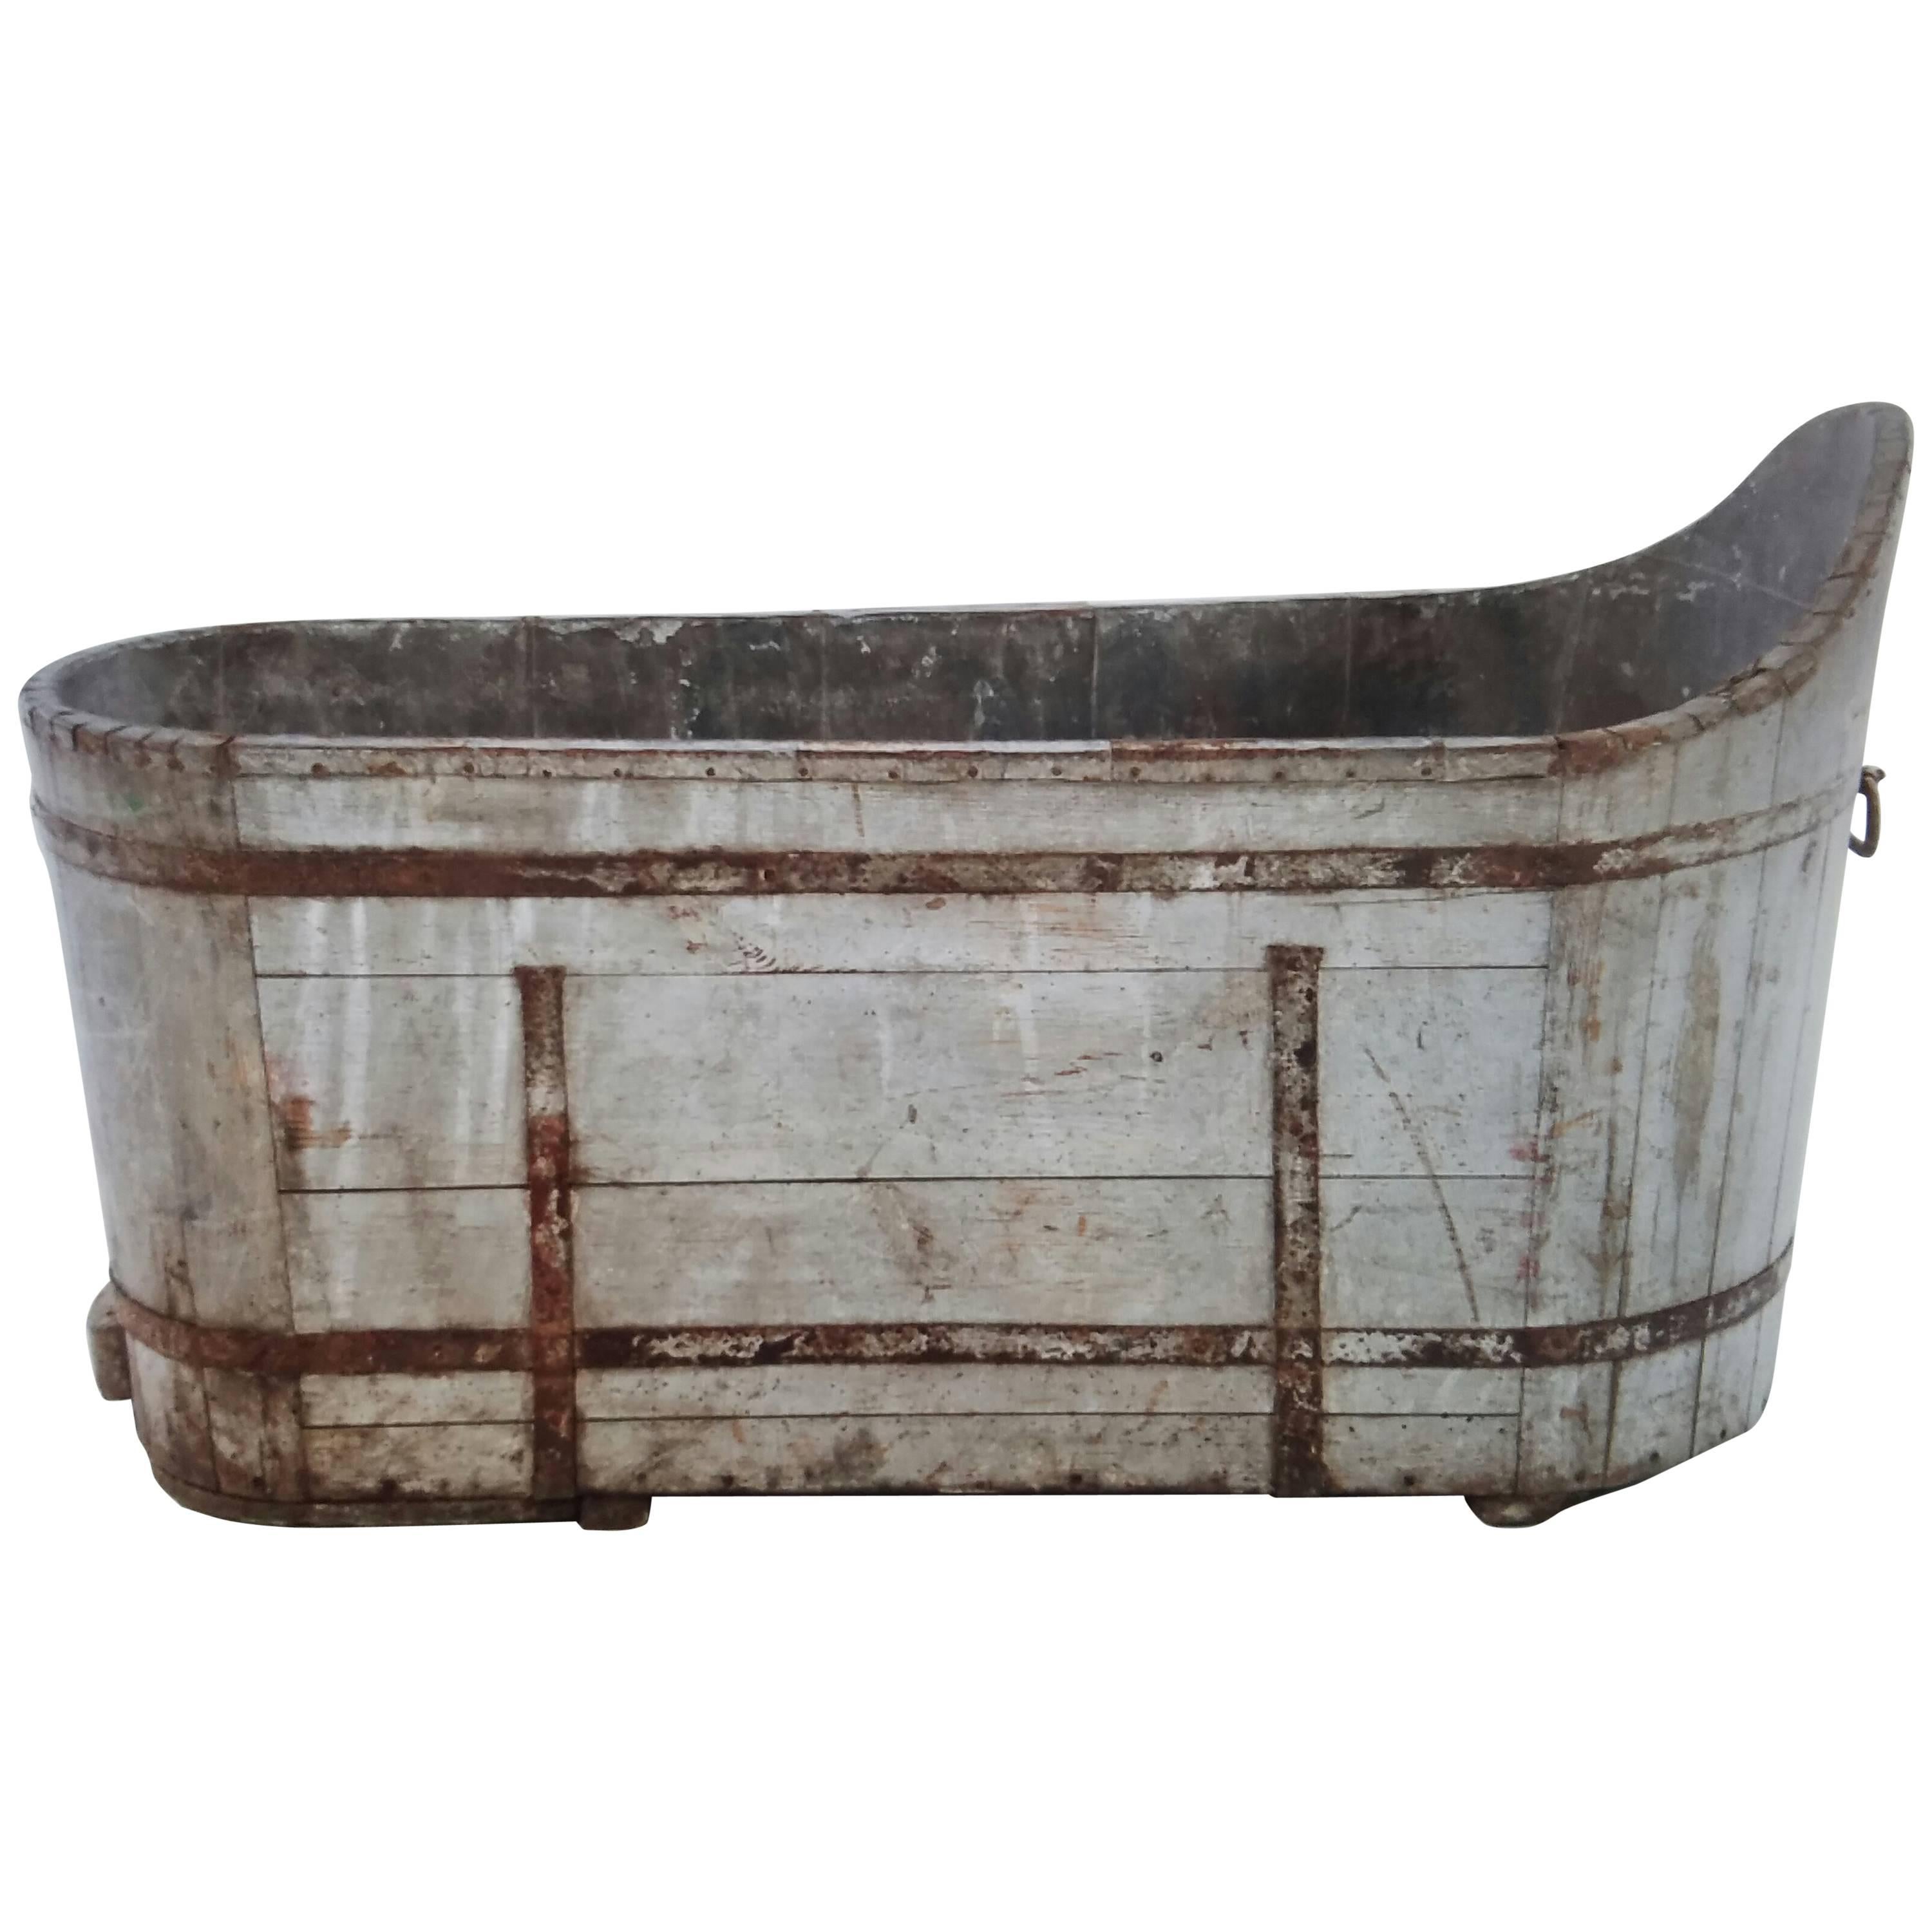 This 19th Century is the best garden planter ever! With its wonderful painted patina and original handle, the condition is very stable and intact. The handle is missing on one side but the interior is fully lined with sheet metal. Make a bench with